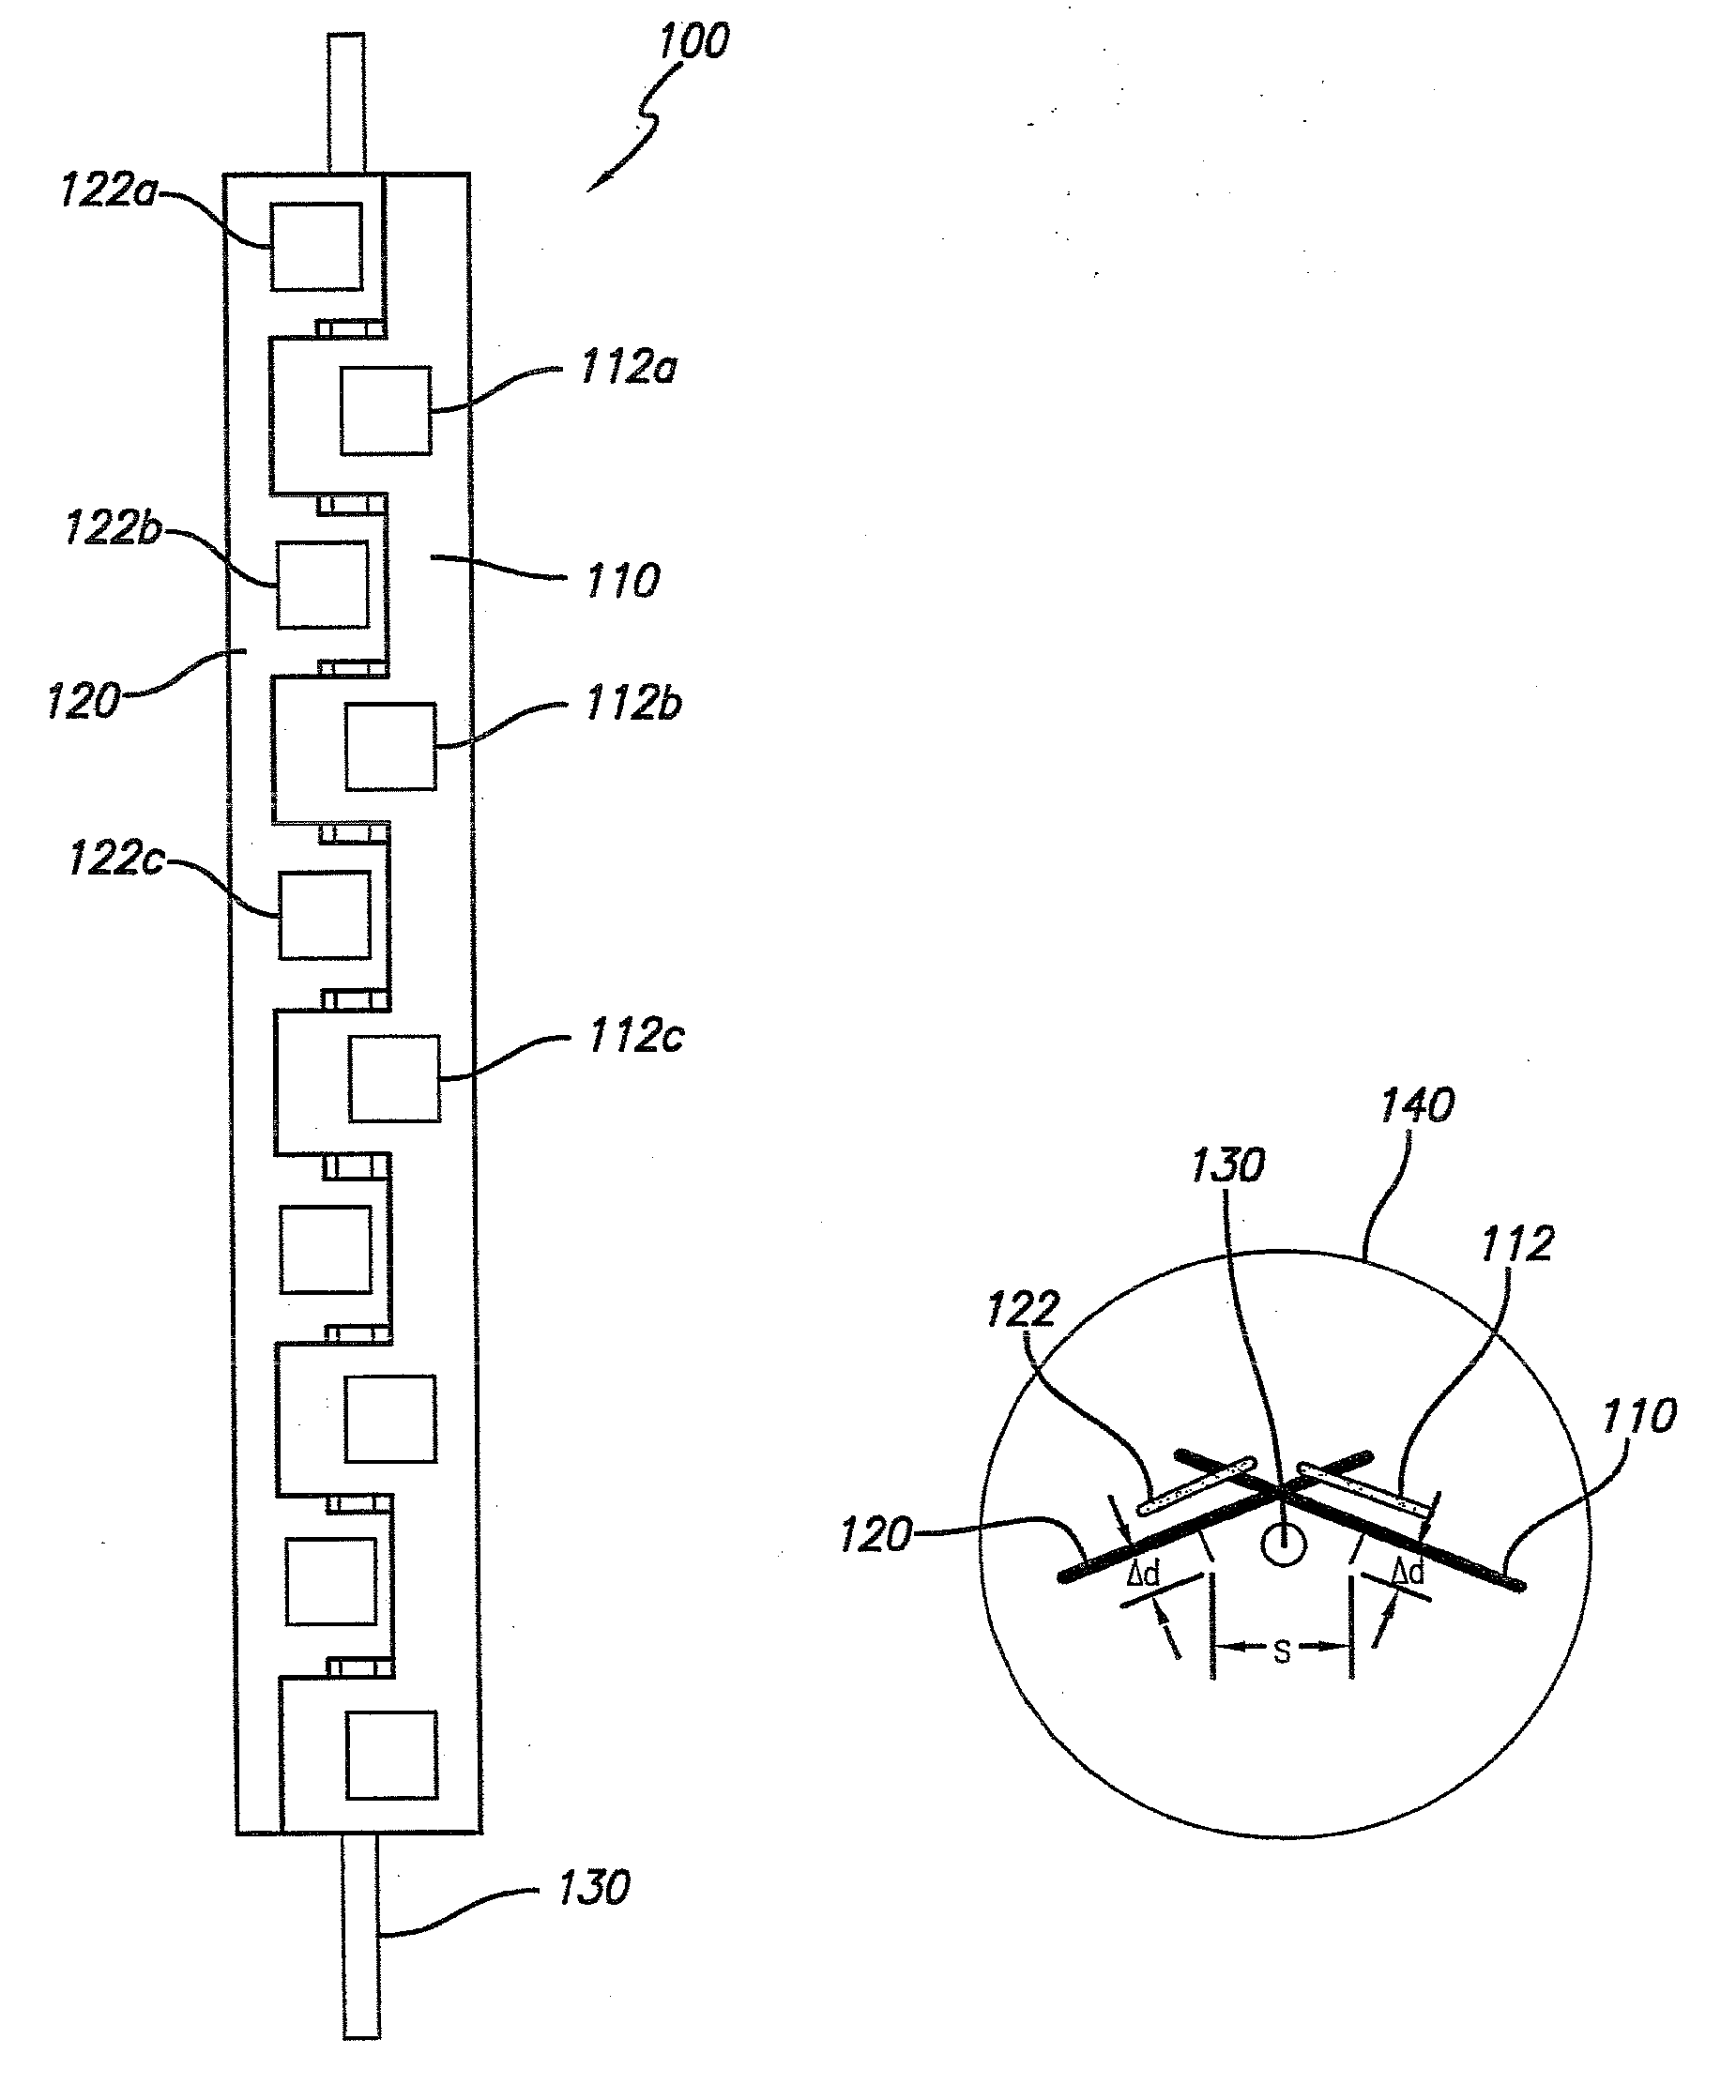 Linear antenna array with azimuth beam augmentation by axial rotation